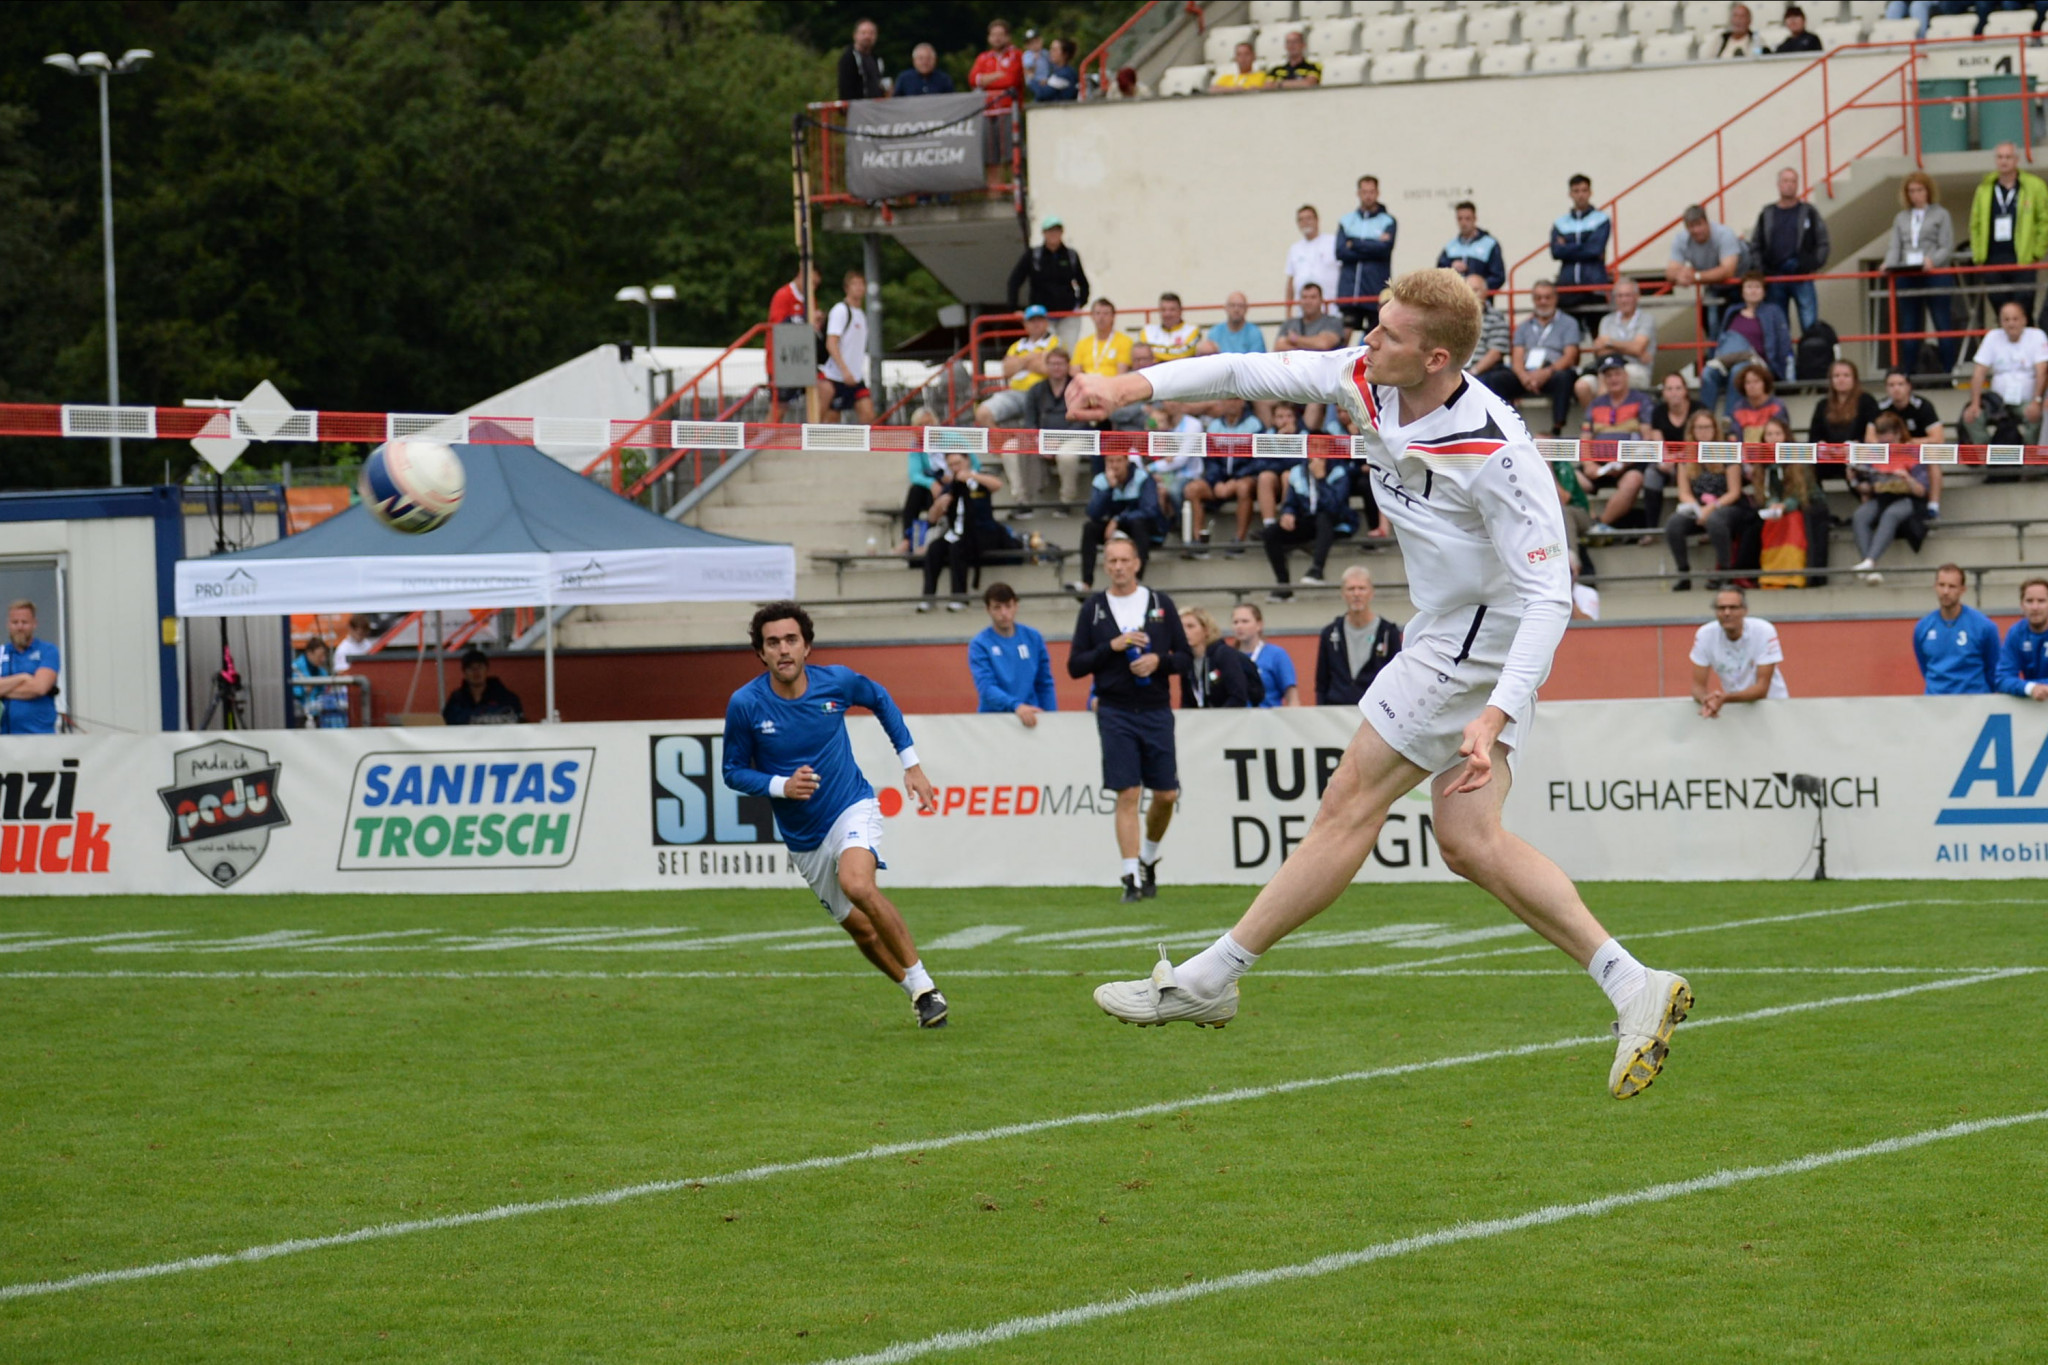 Holders Germany continue perfect start to IFA World Fistball Championship